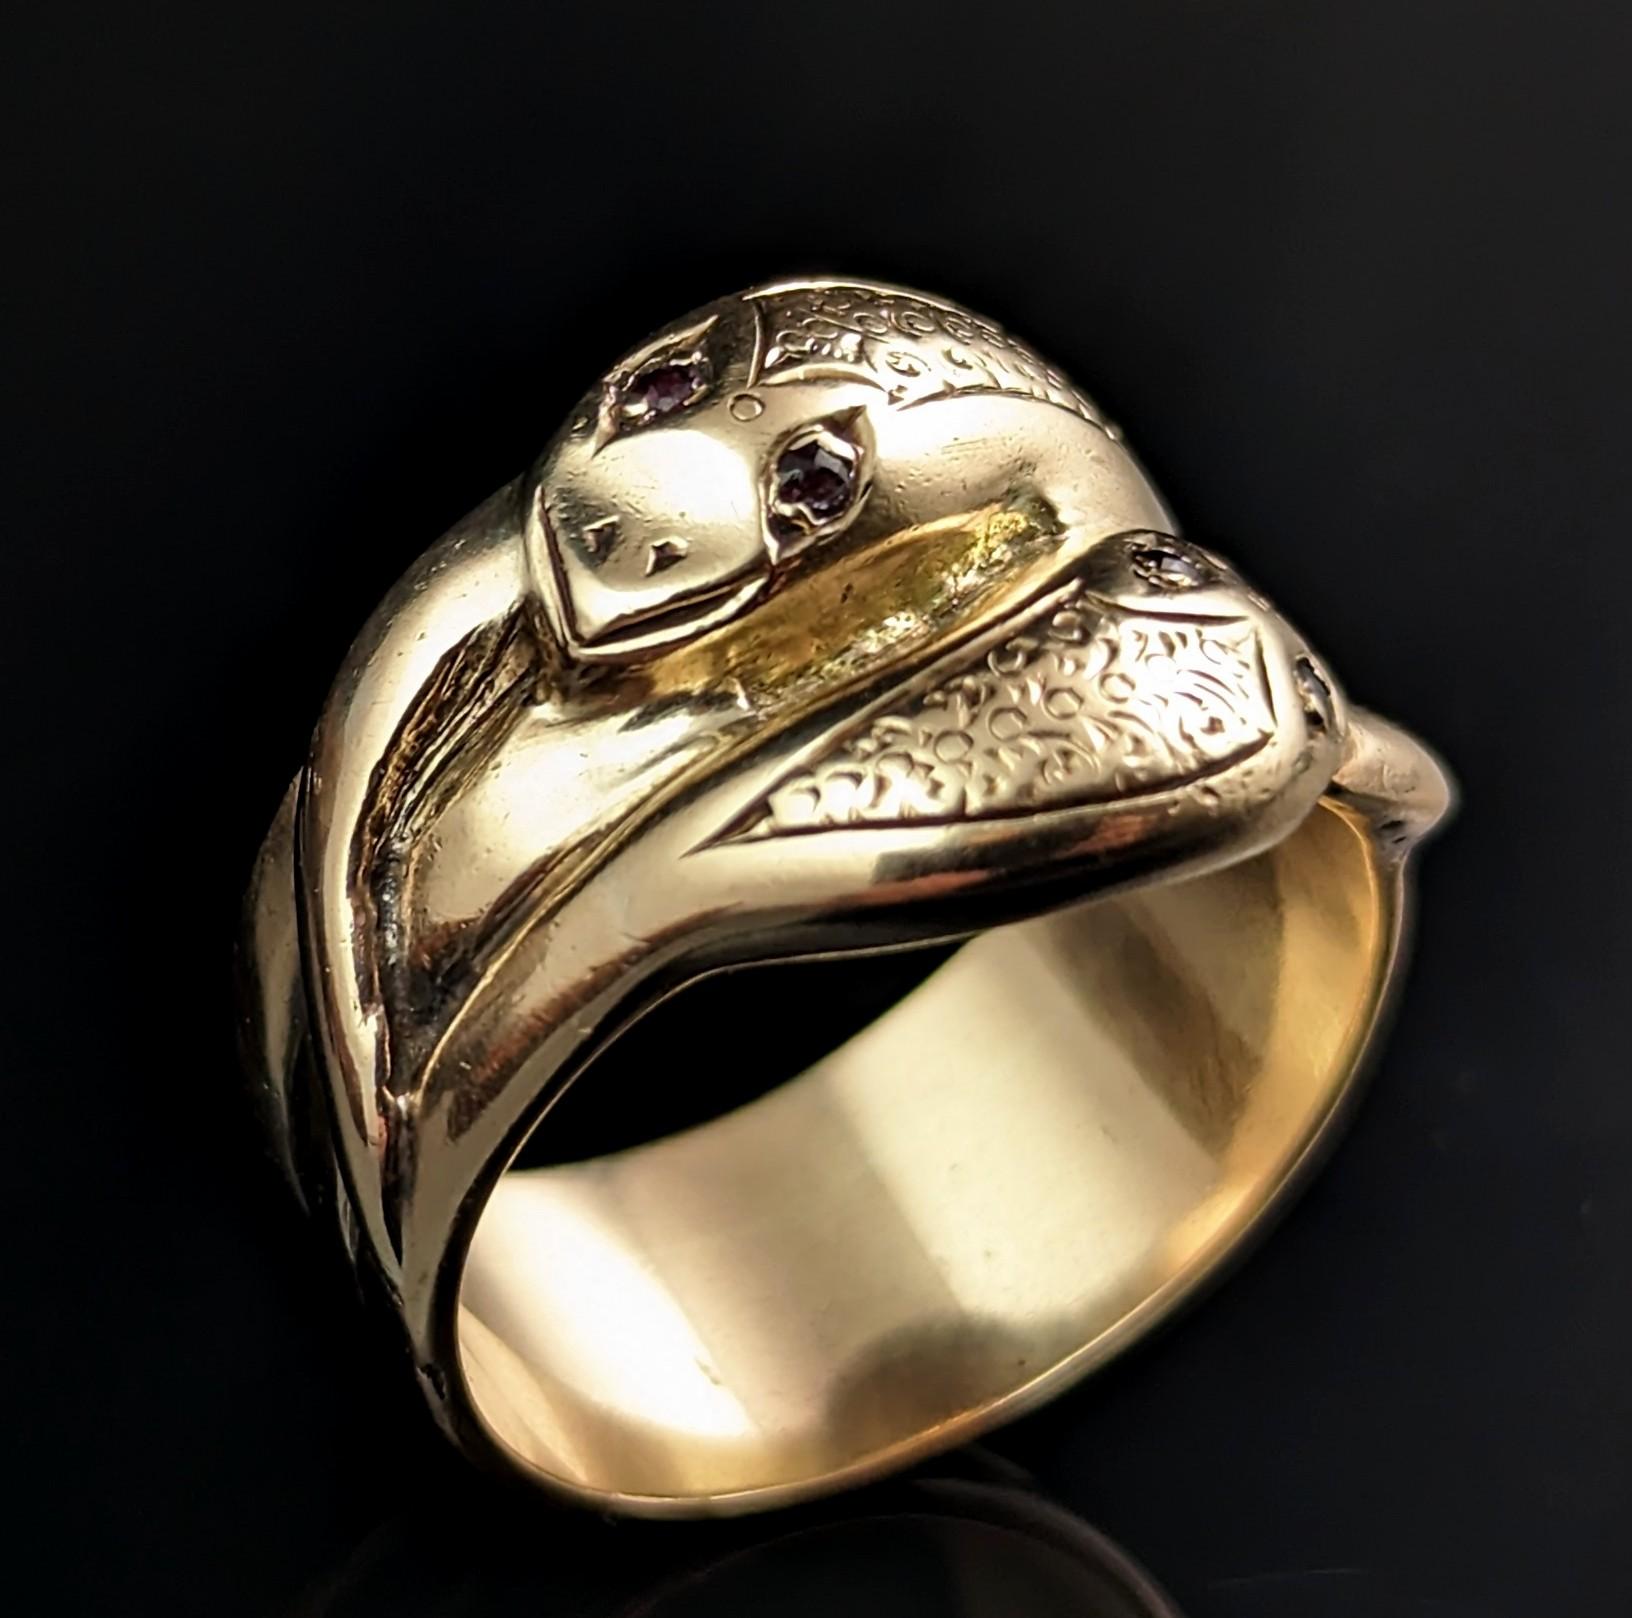 Rose Cut Antique Double Coiled Snake Ring, 9k Gold, Heavy, Ruby Eyes